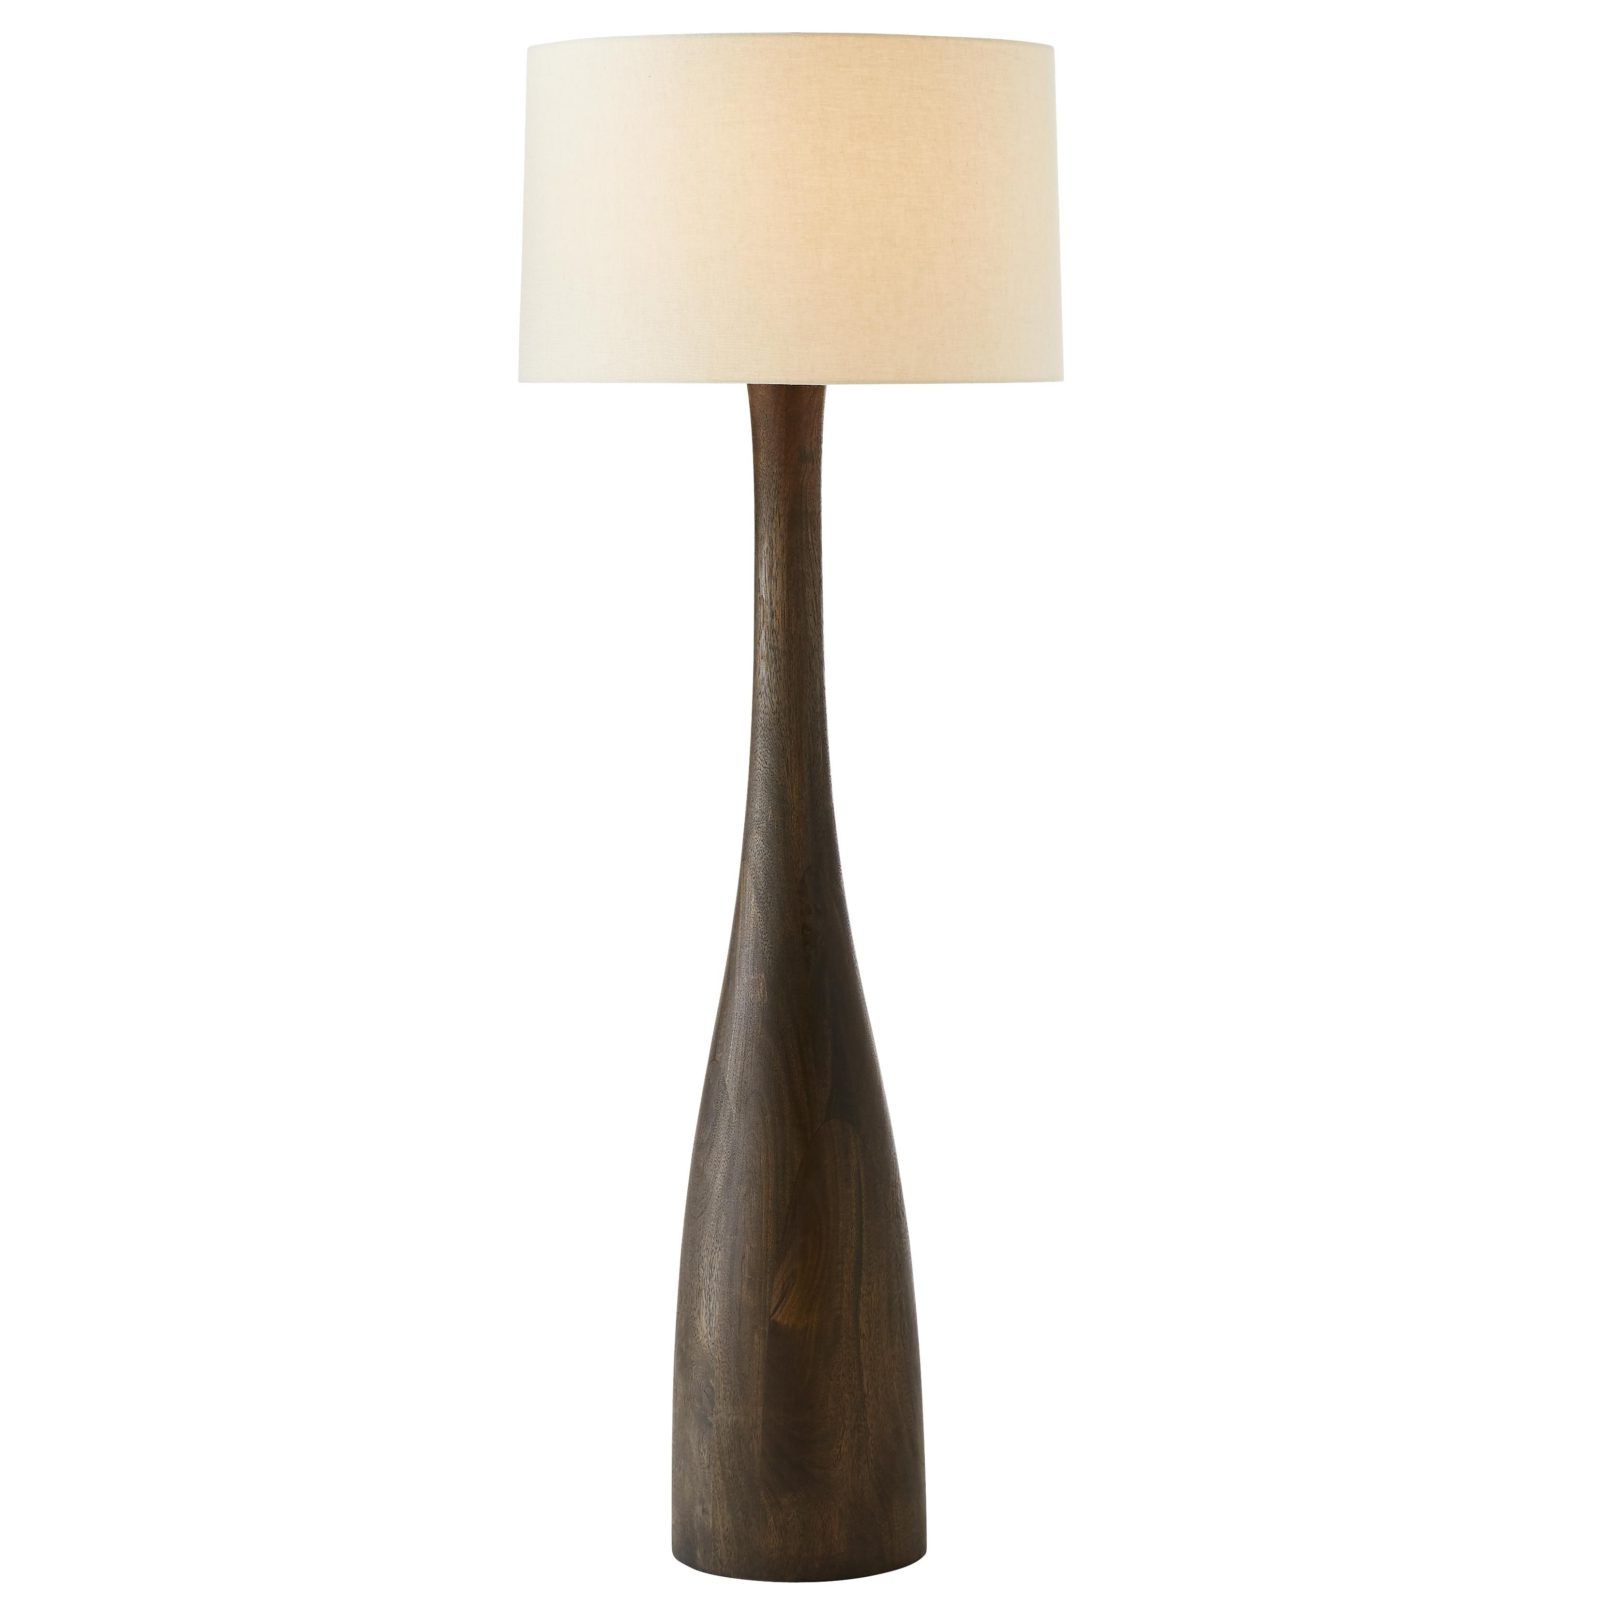 Mango Wood Standing Lamps Within Most Current Mango Wood Floor Lamp – Solid Mango Wood Accent Floor Lamp (View 3 of 15)